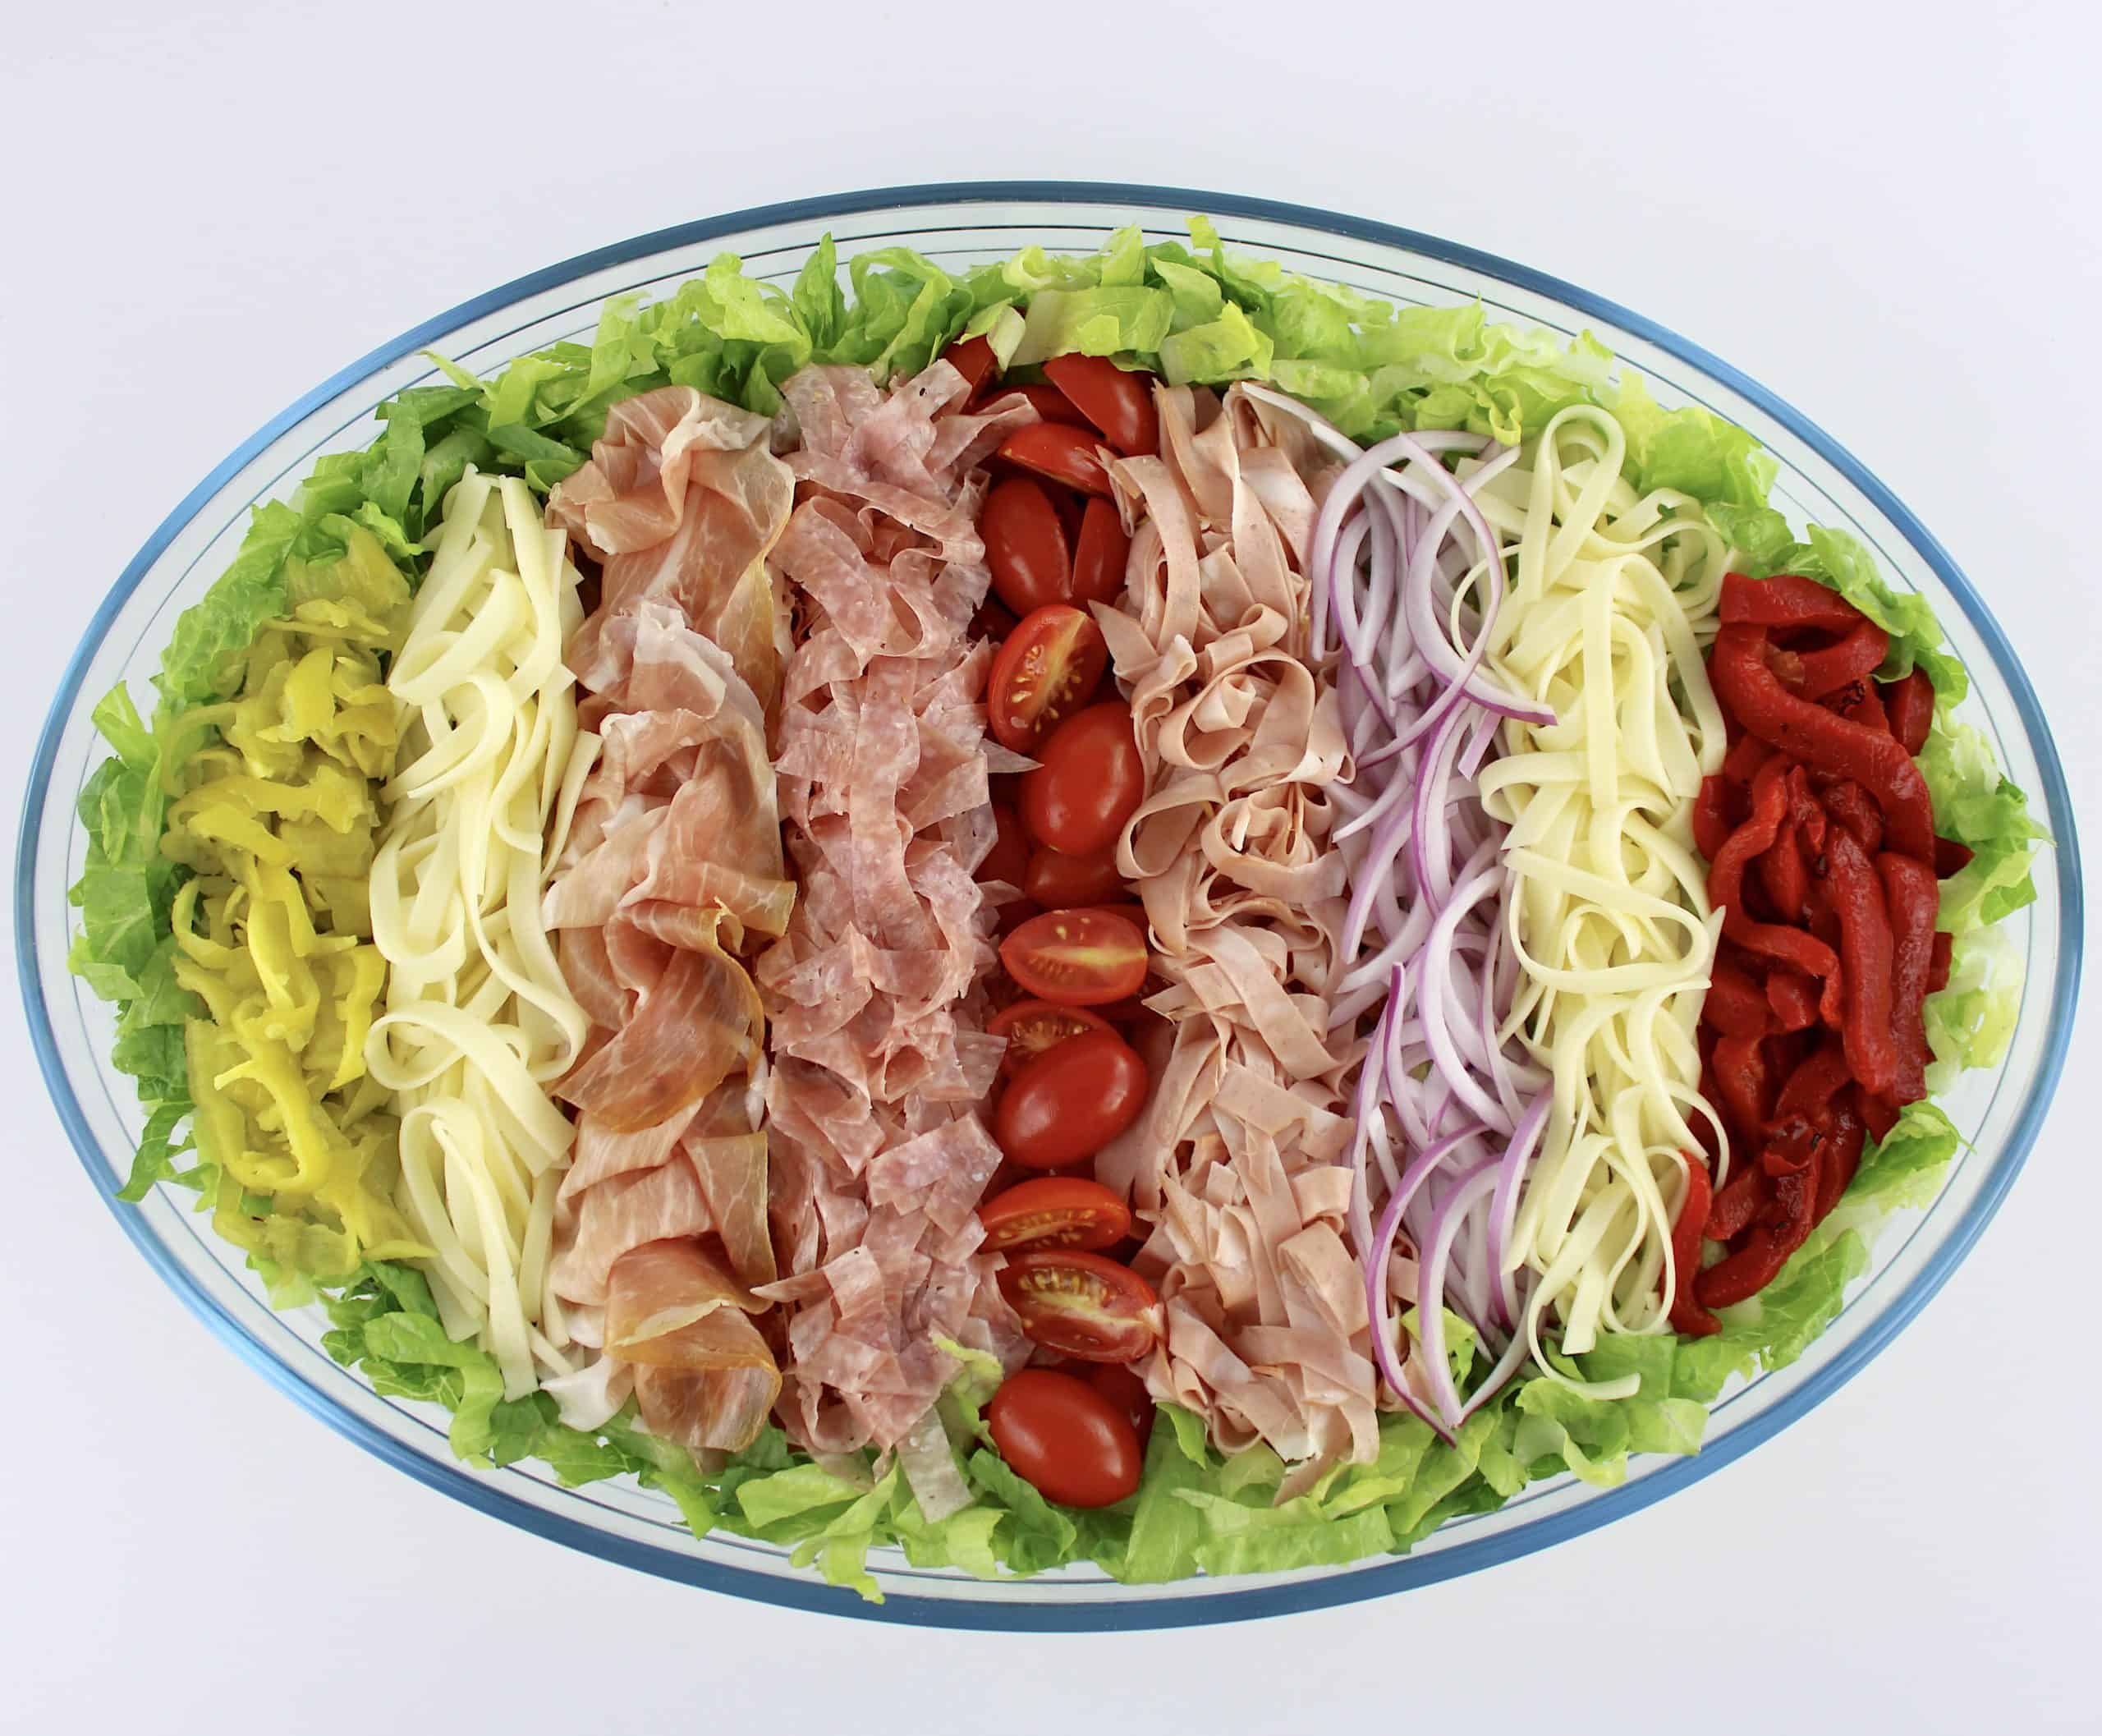 Grinder Salad in oval bowl arranged in rows